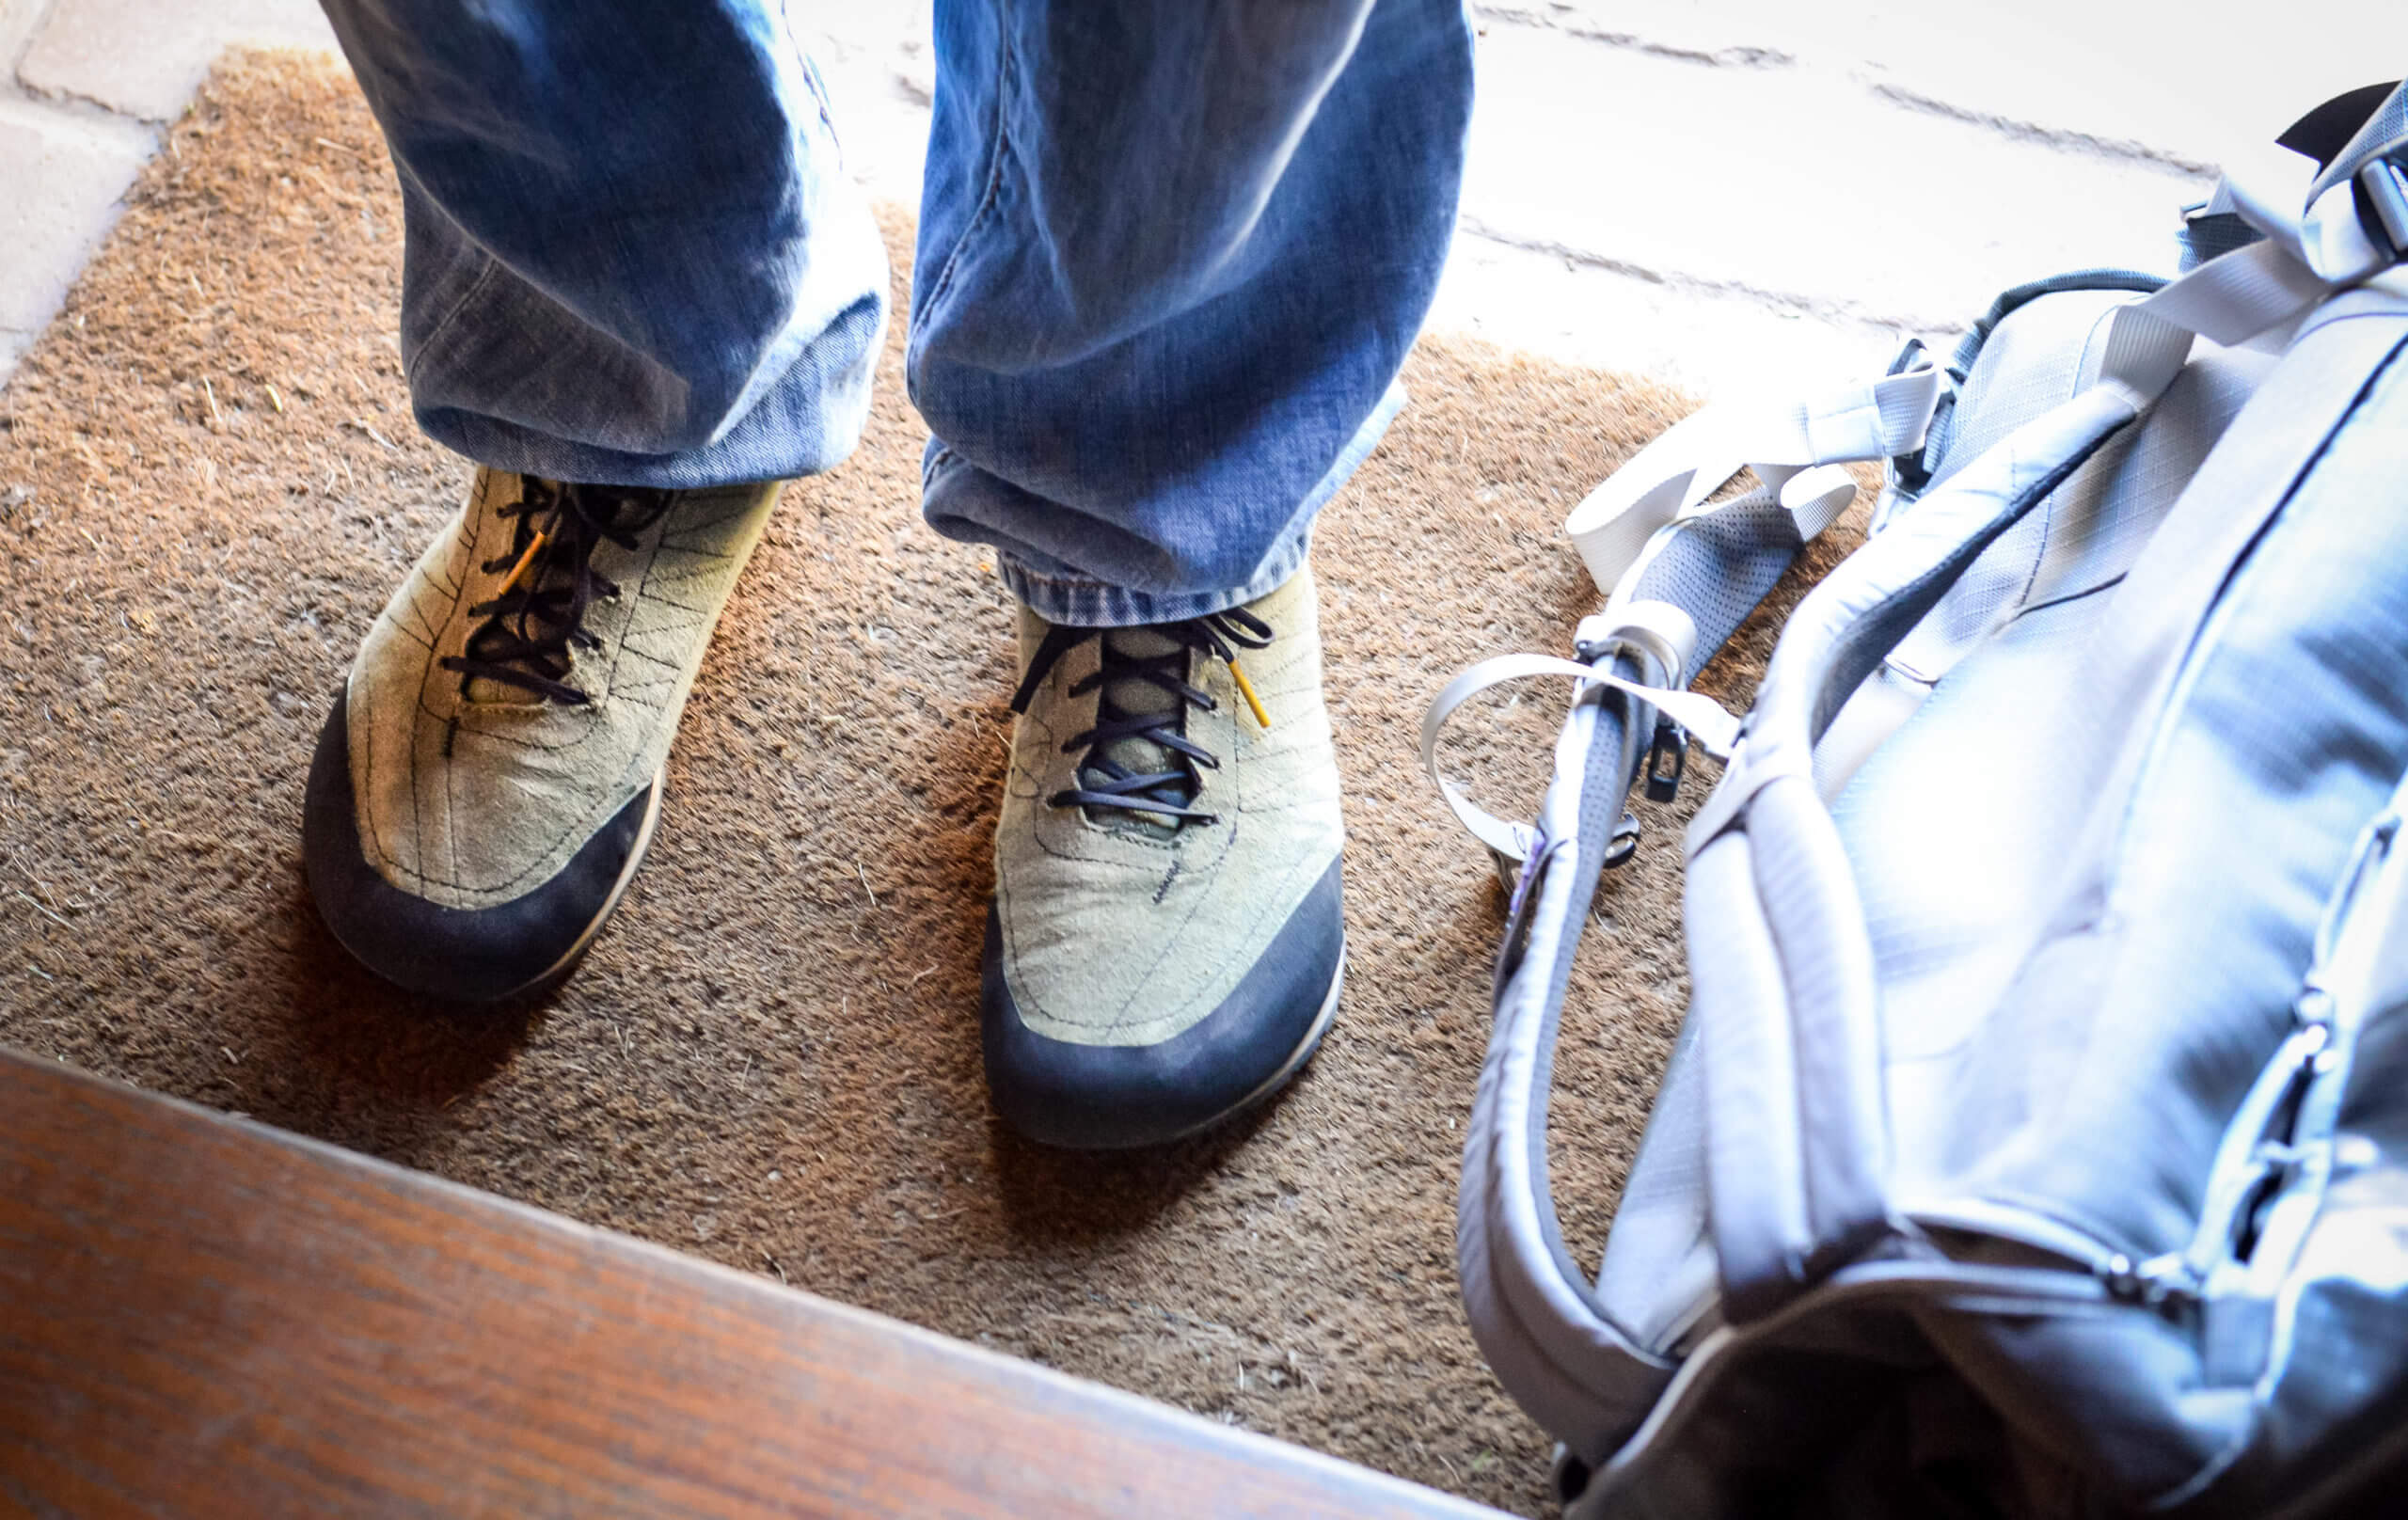 A view looking down at a person's shoes on the mat of a front doorstep. A backpack is on the mat.